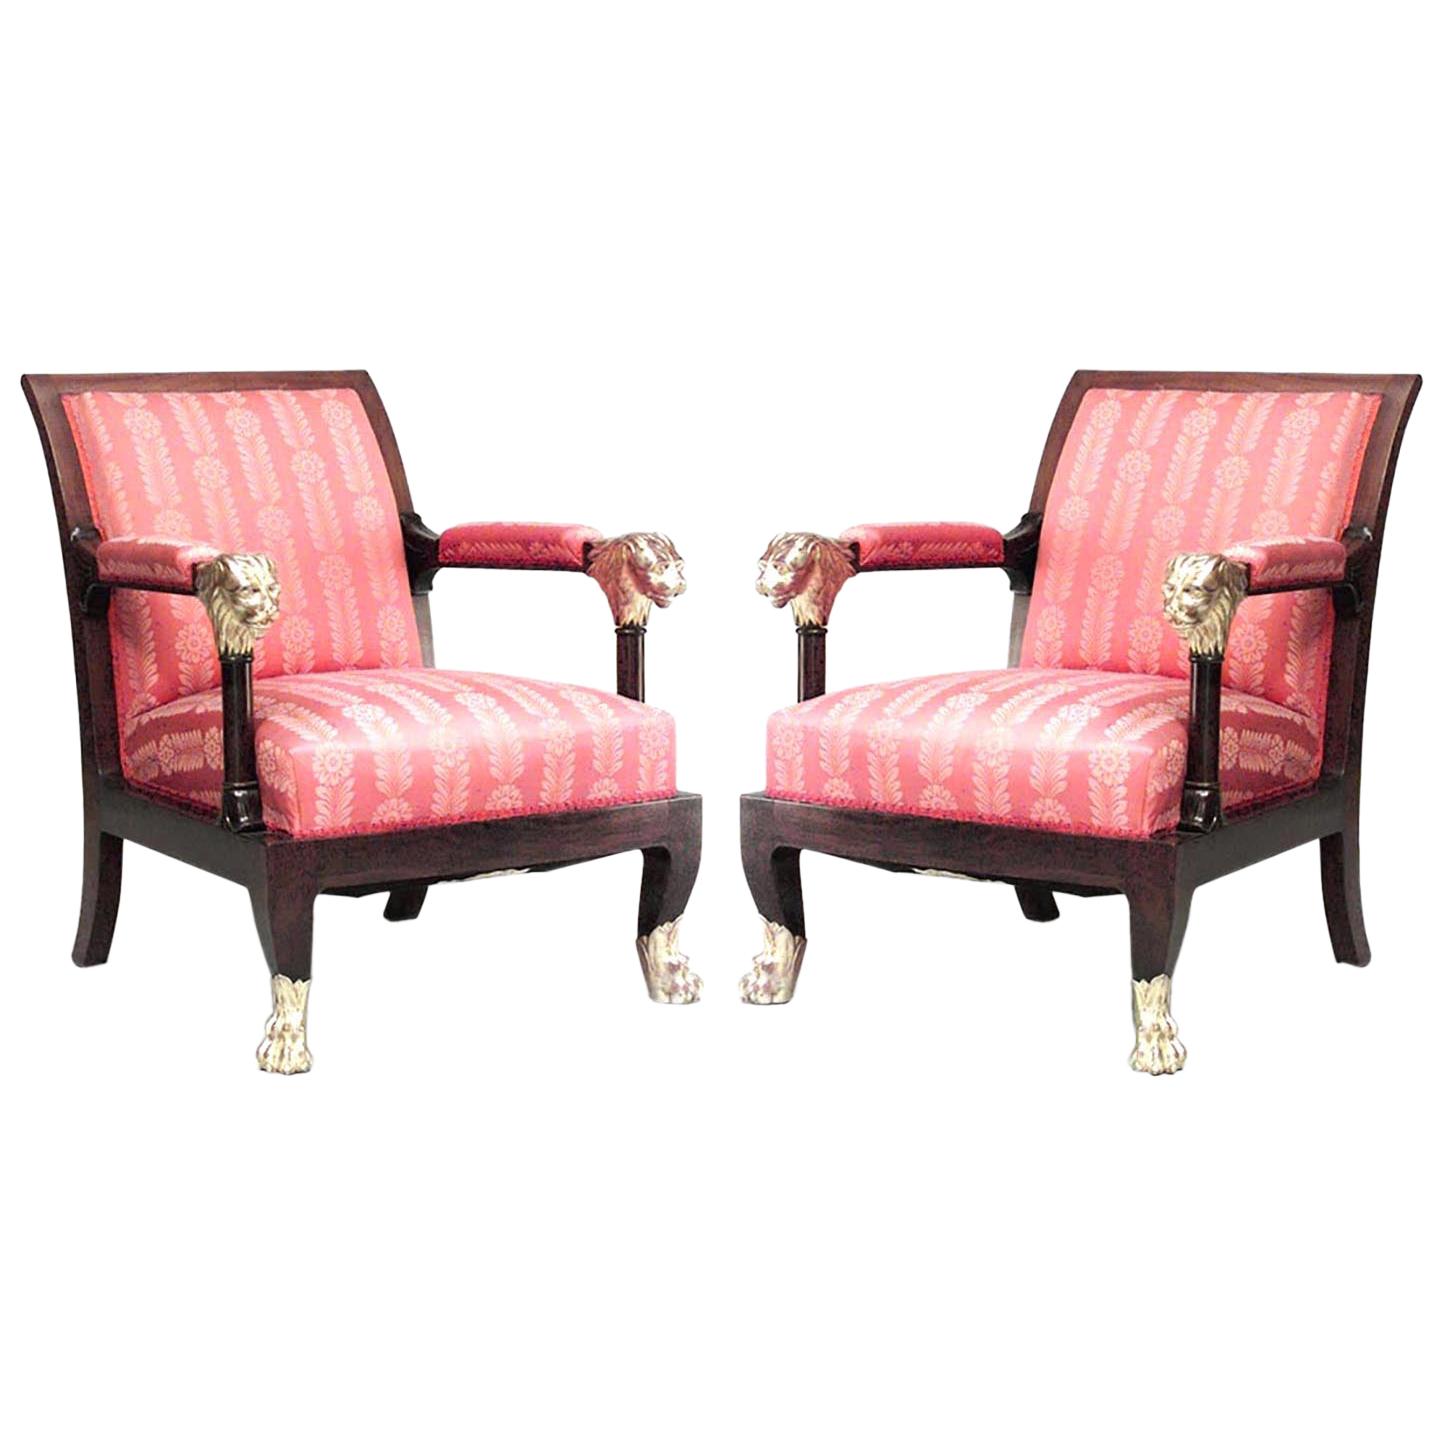 English Regency Red Armchairs For Sale